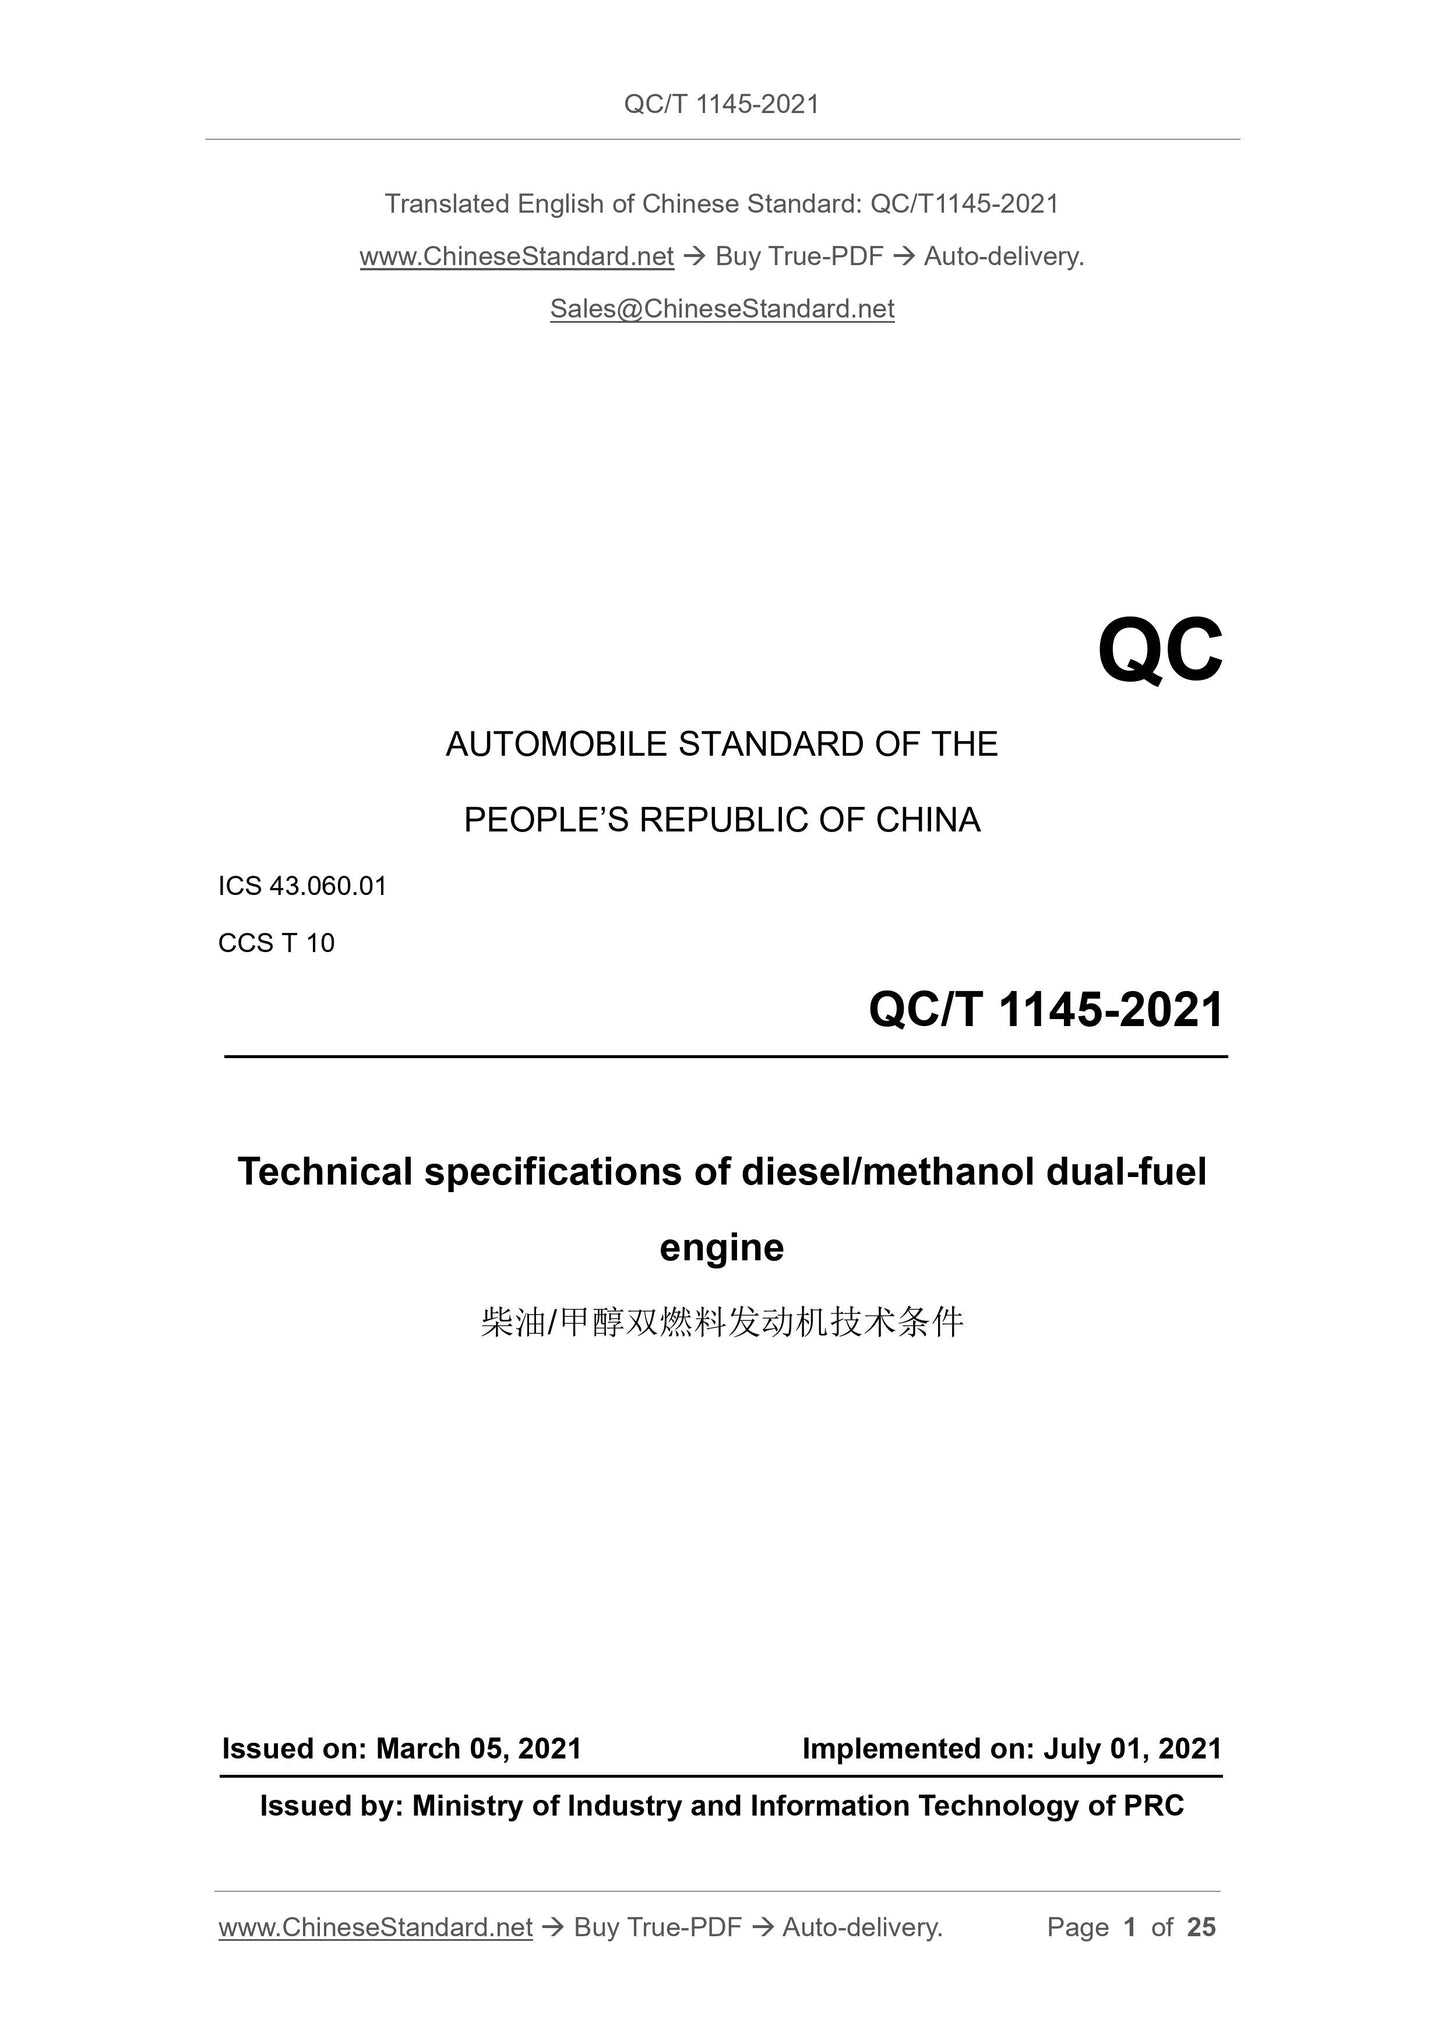 QC/T 1145-2021 Page 1